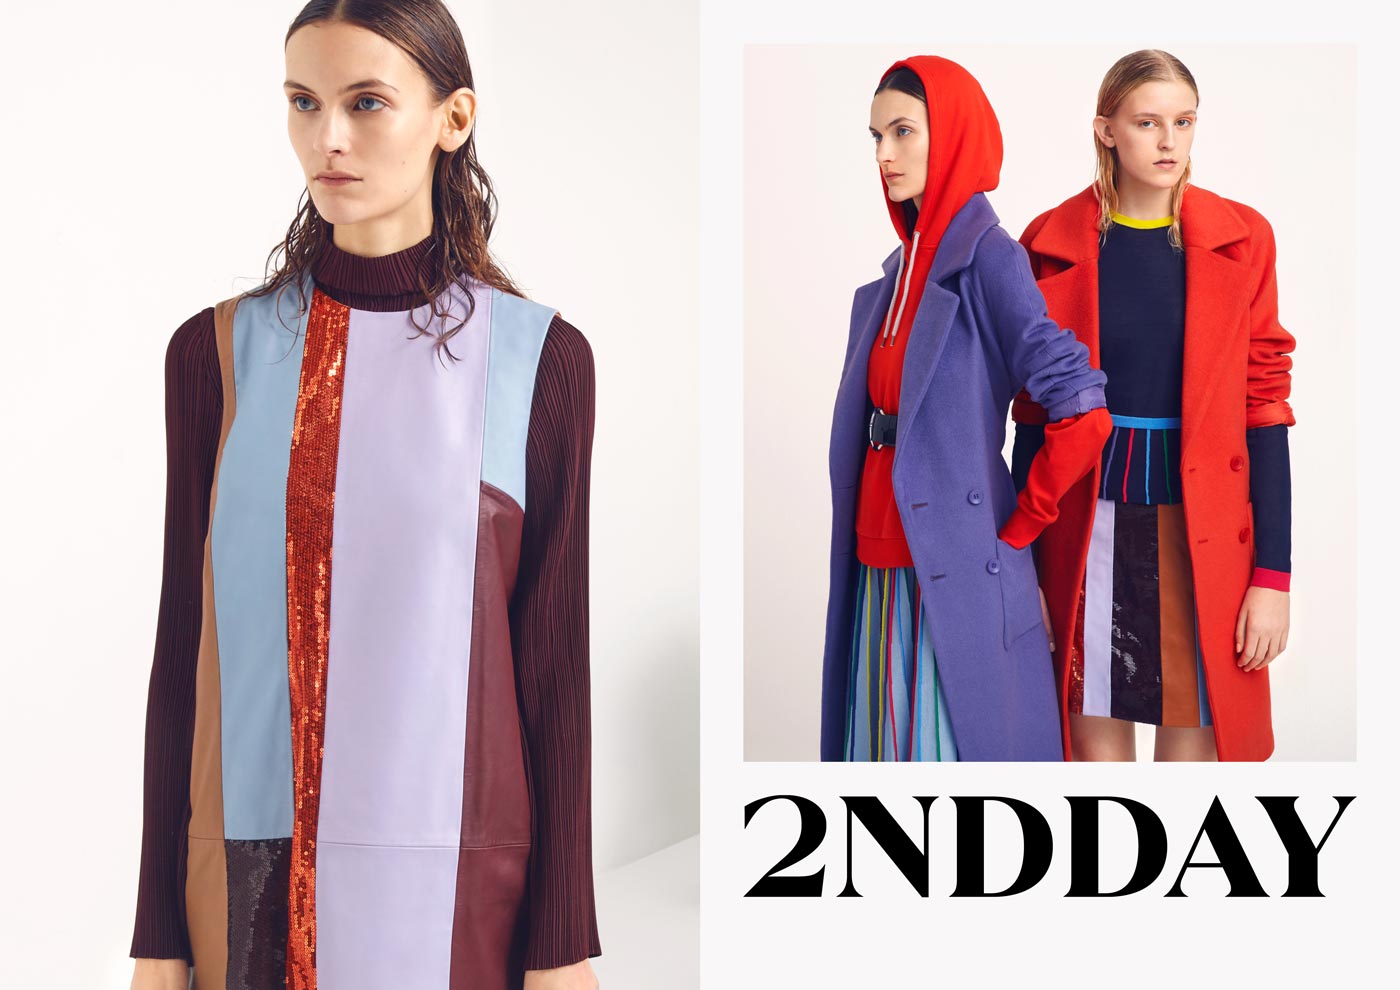 2ndday – Campaign Autumn/Winter 2017